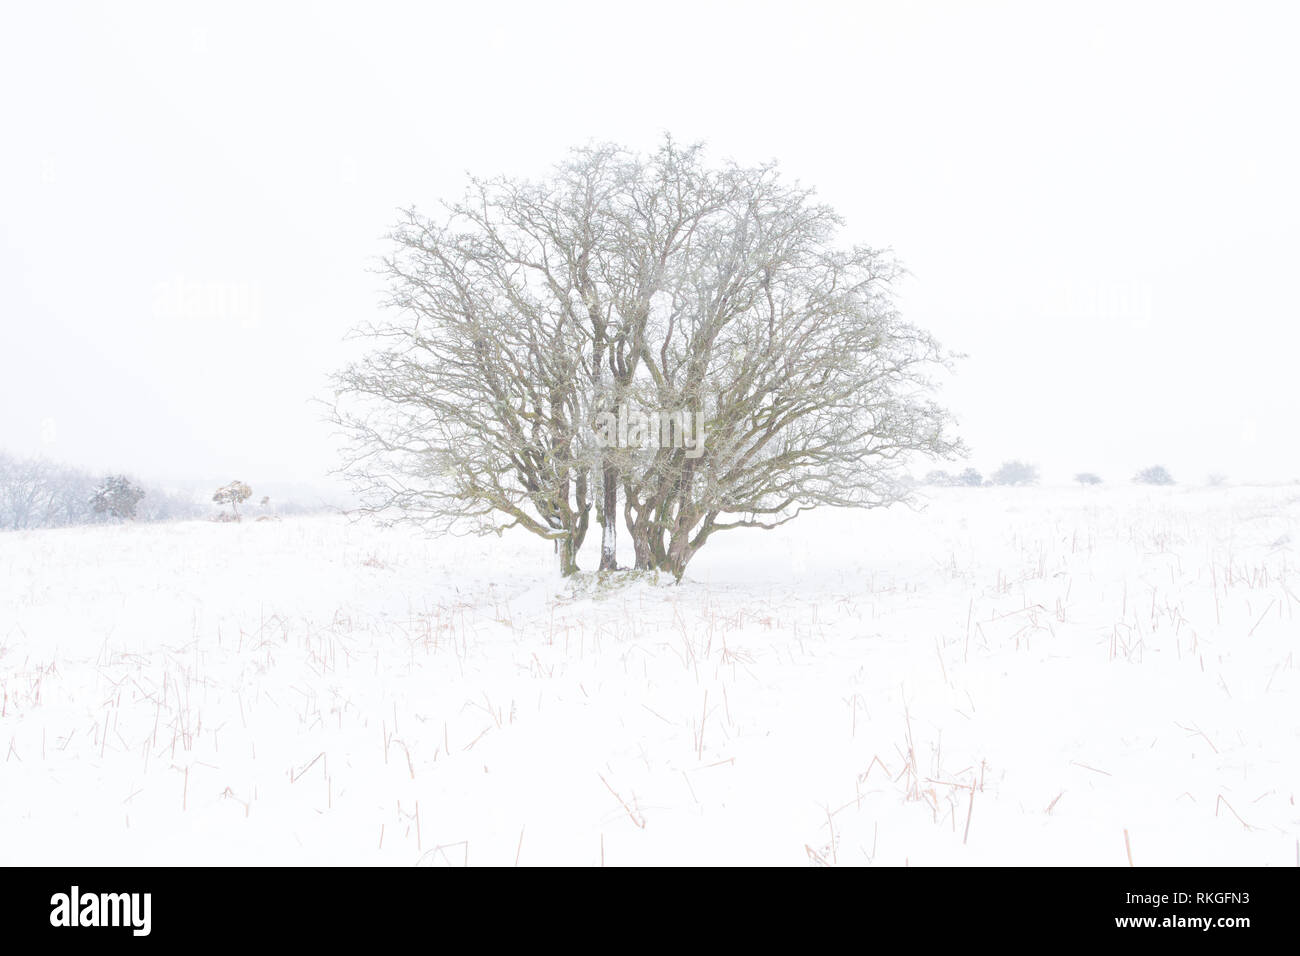 Ice clad tree's in a snow landscape. Stock Photo